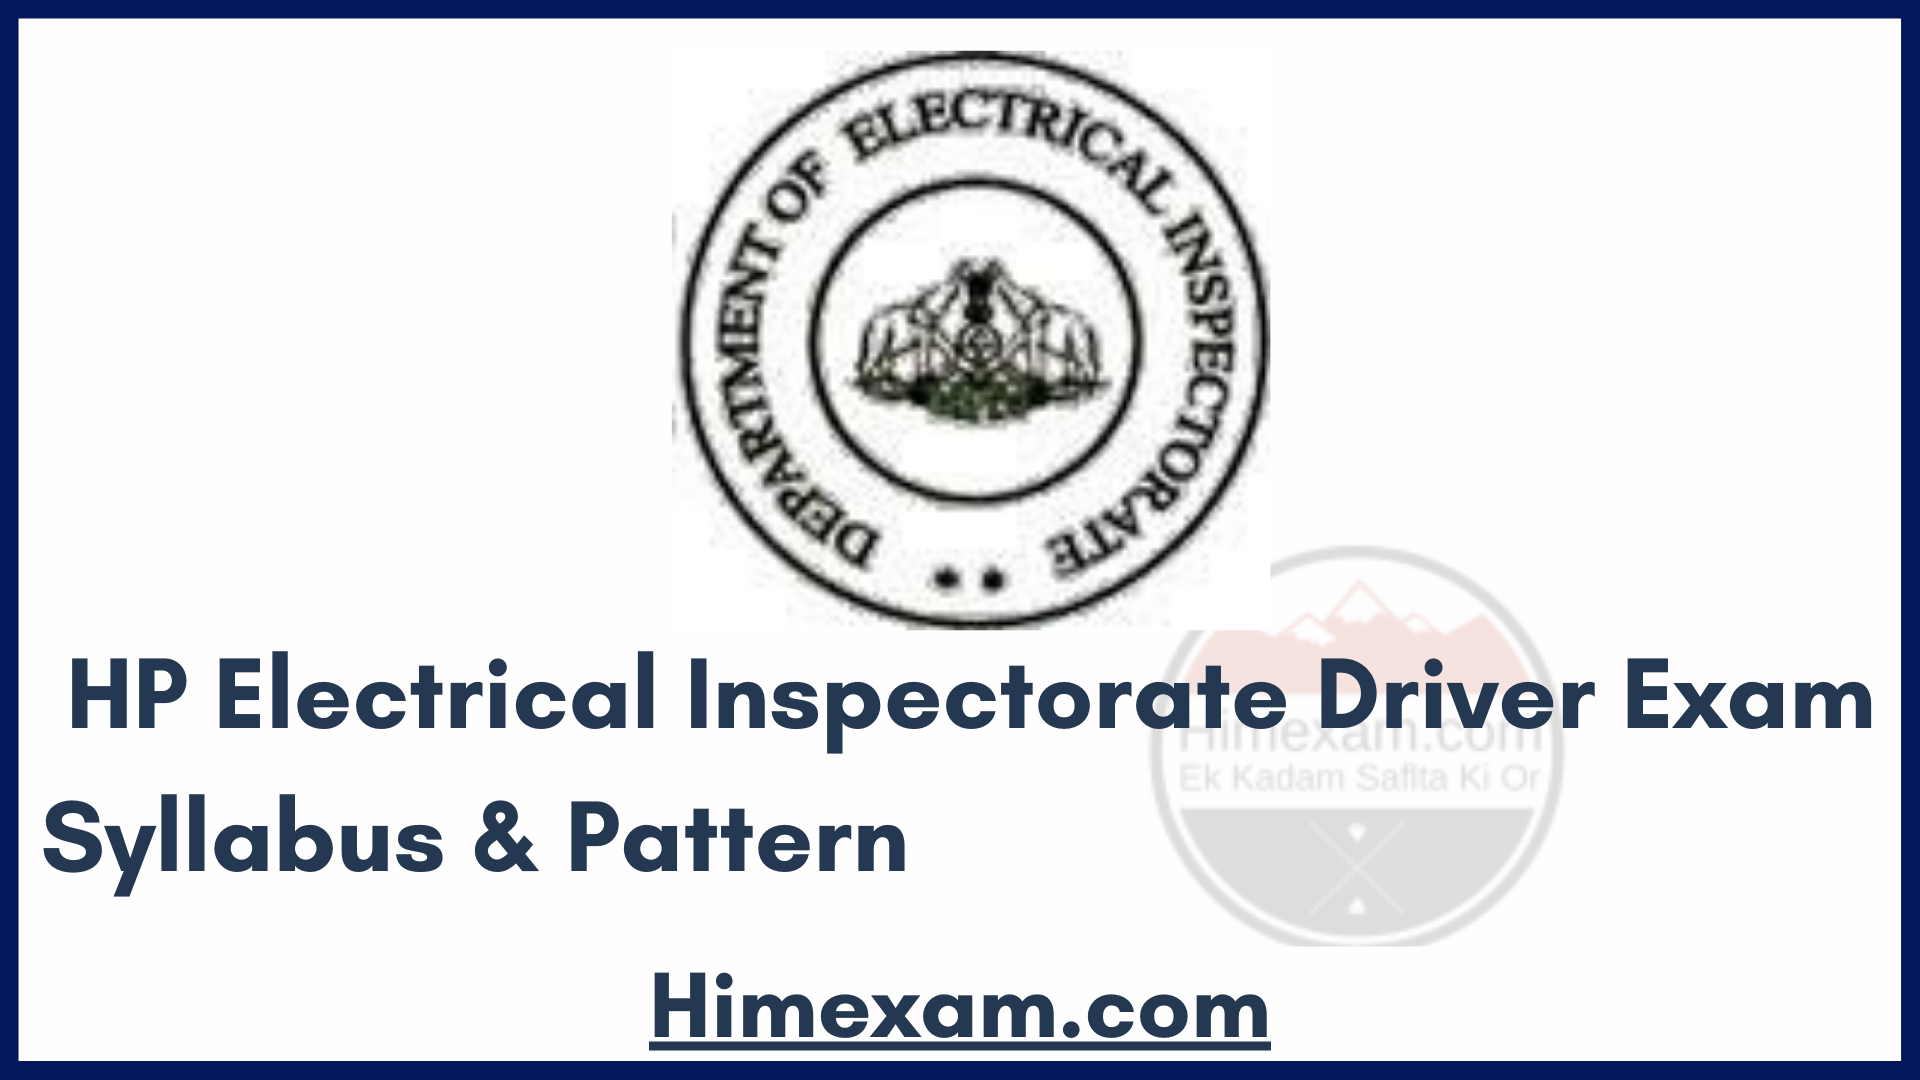 HP Electrical Inspectorate Driver Exam Syllabus & Pattern